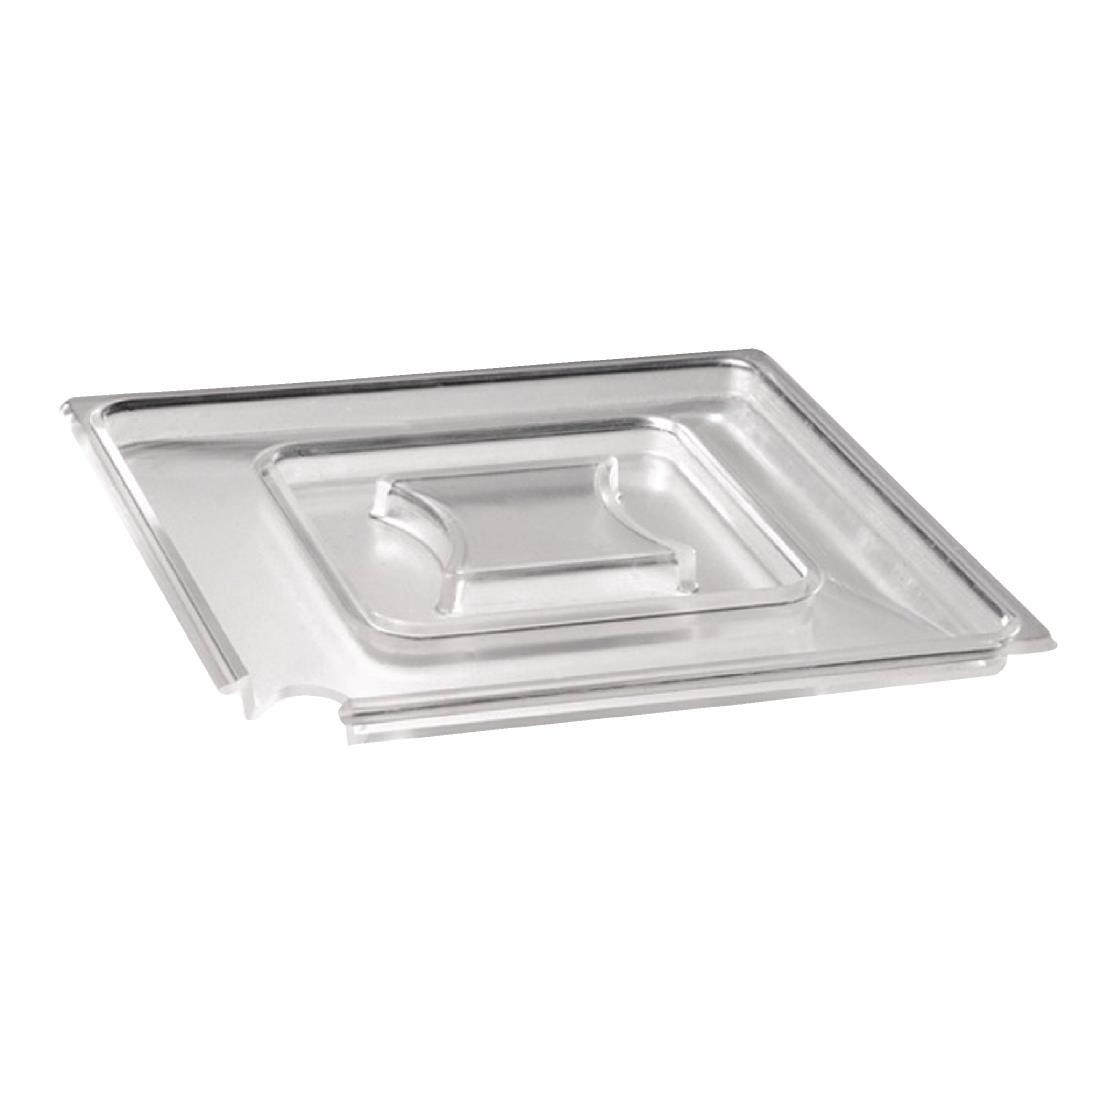 APS Float Clear Square Cover 250 x 250mm - GF102  - 1